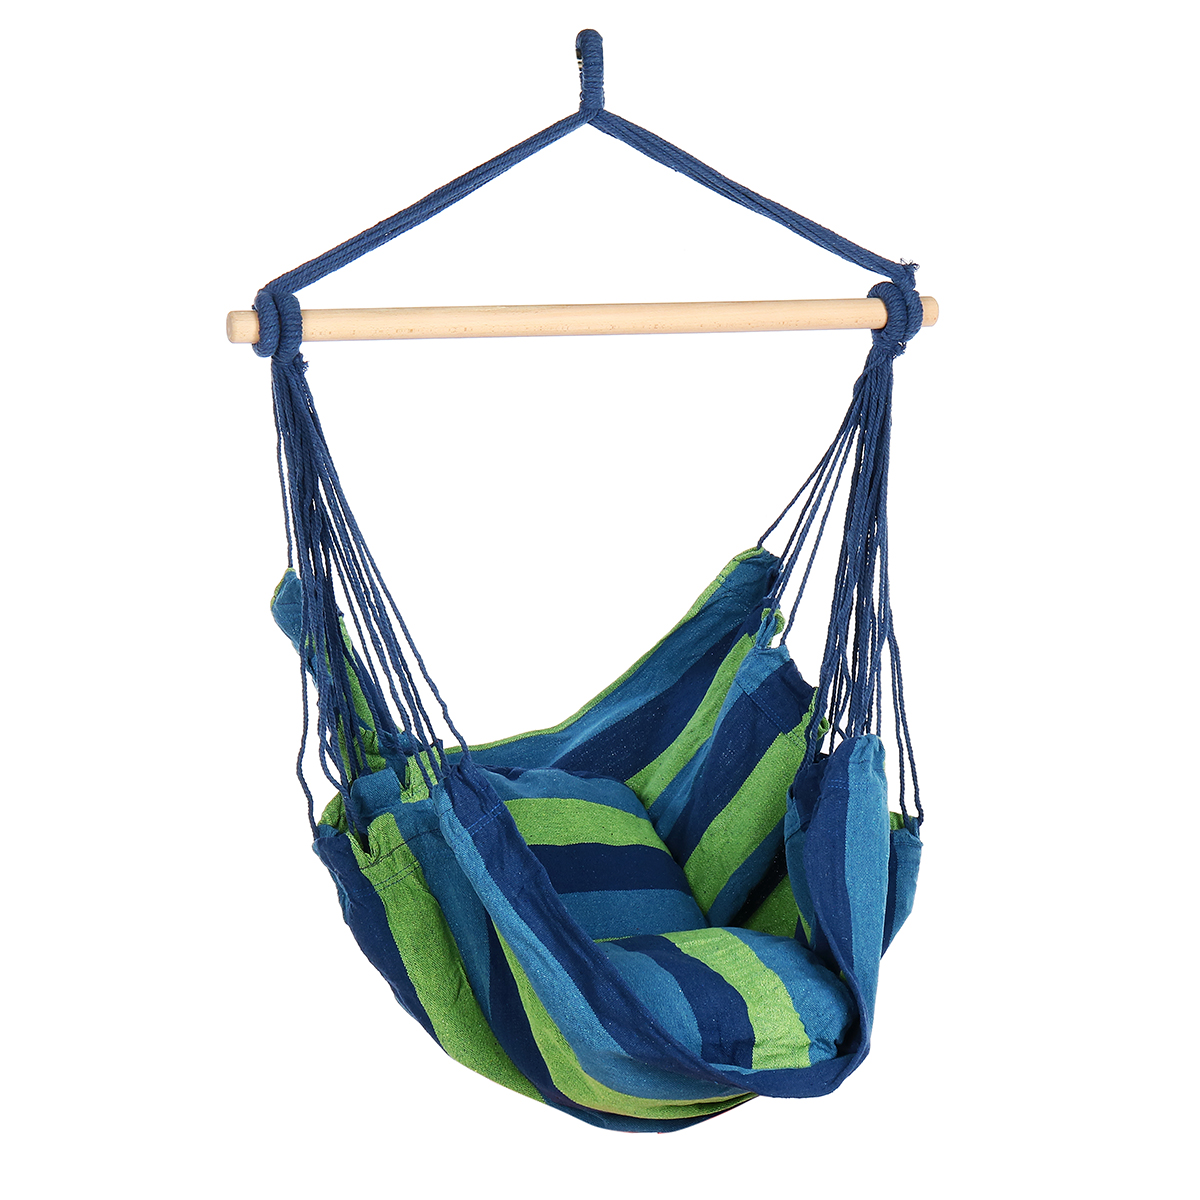 Hammock-Chair-Camping-Hanging-Rope-Swing-Outdoor-Picnic-Hiking-Travel-1697620-4